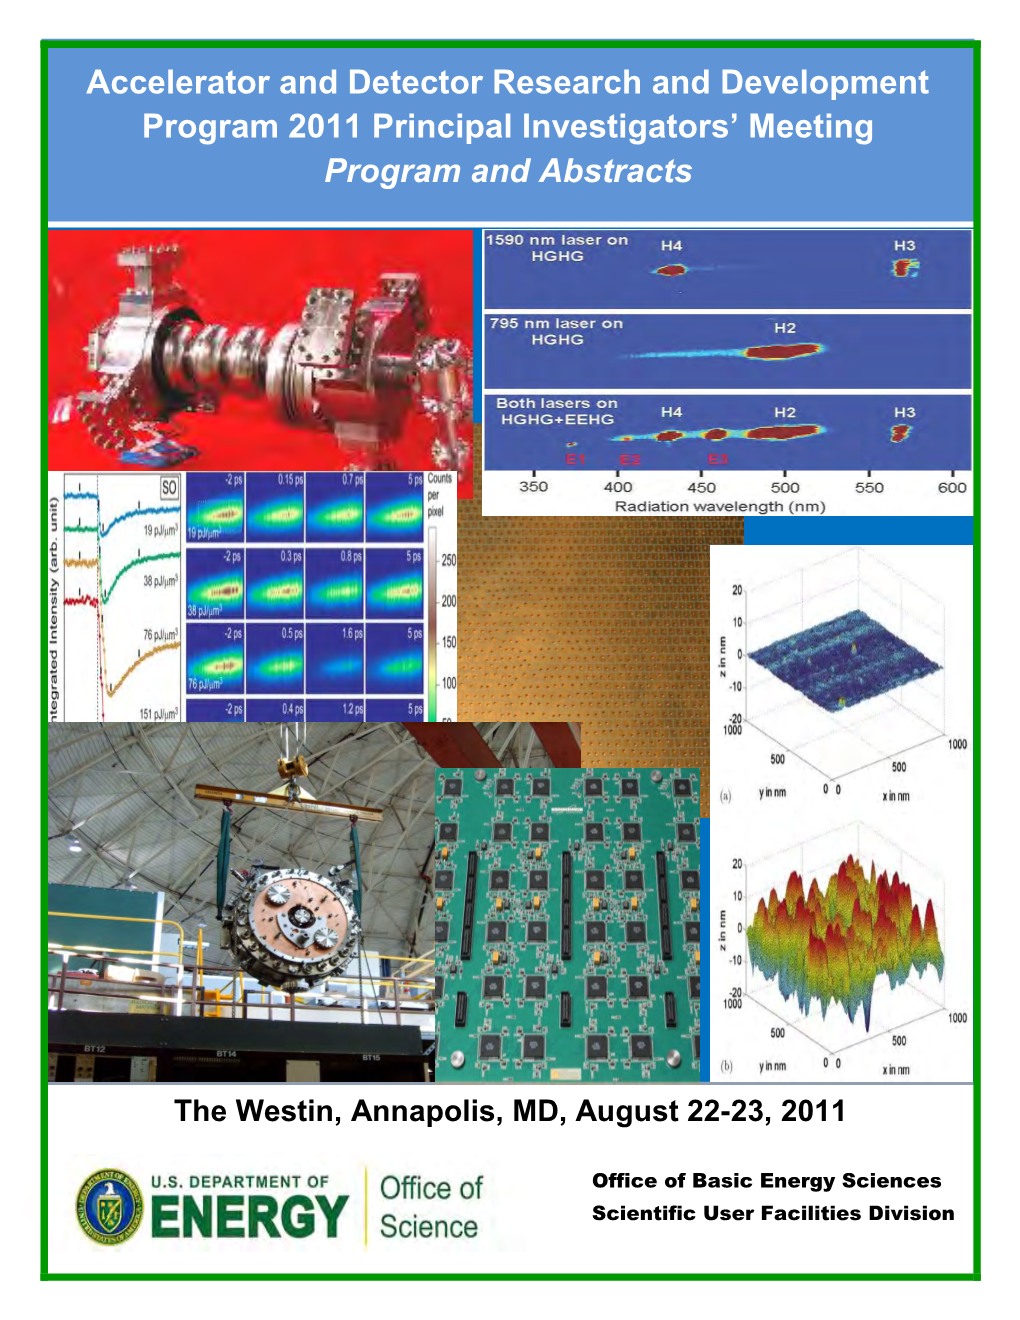 Accelerator and Detector Research and Development Program 2011 Principal Investigators' Meeting Program and Abstracts